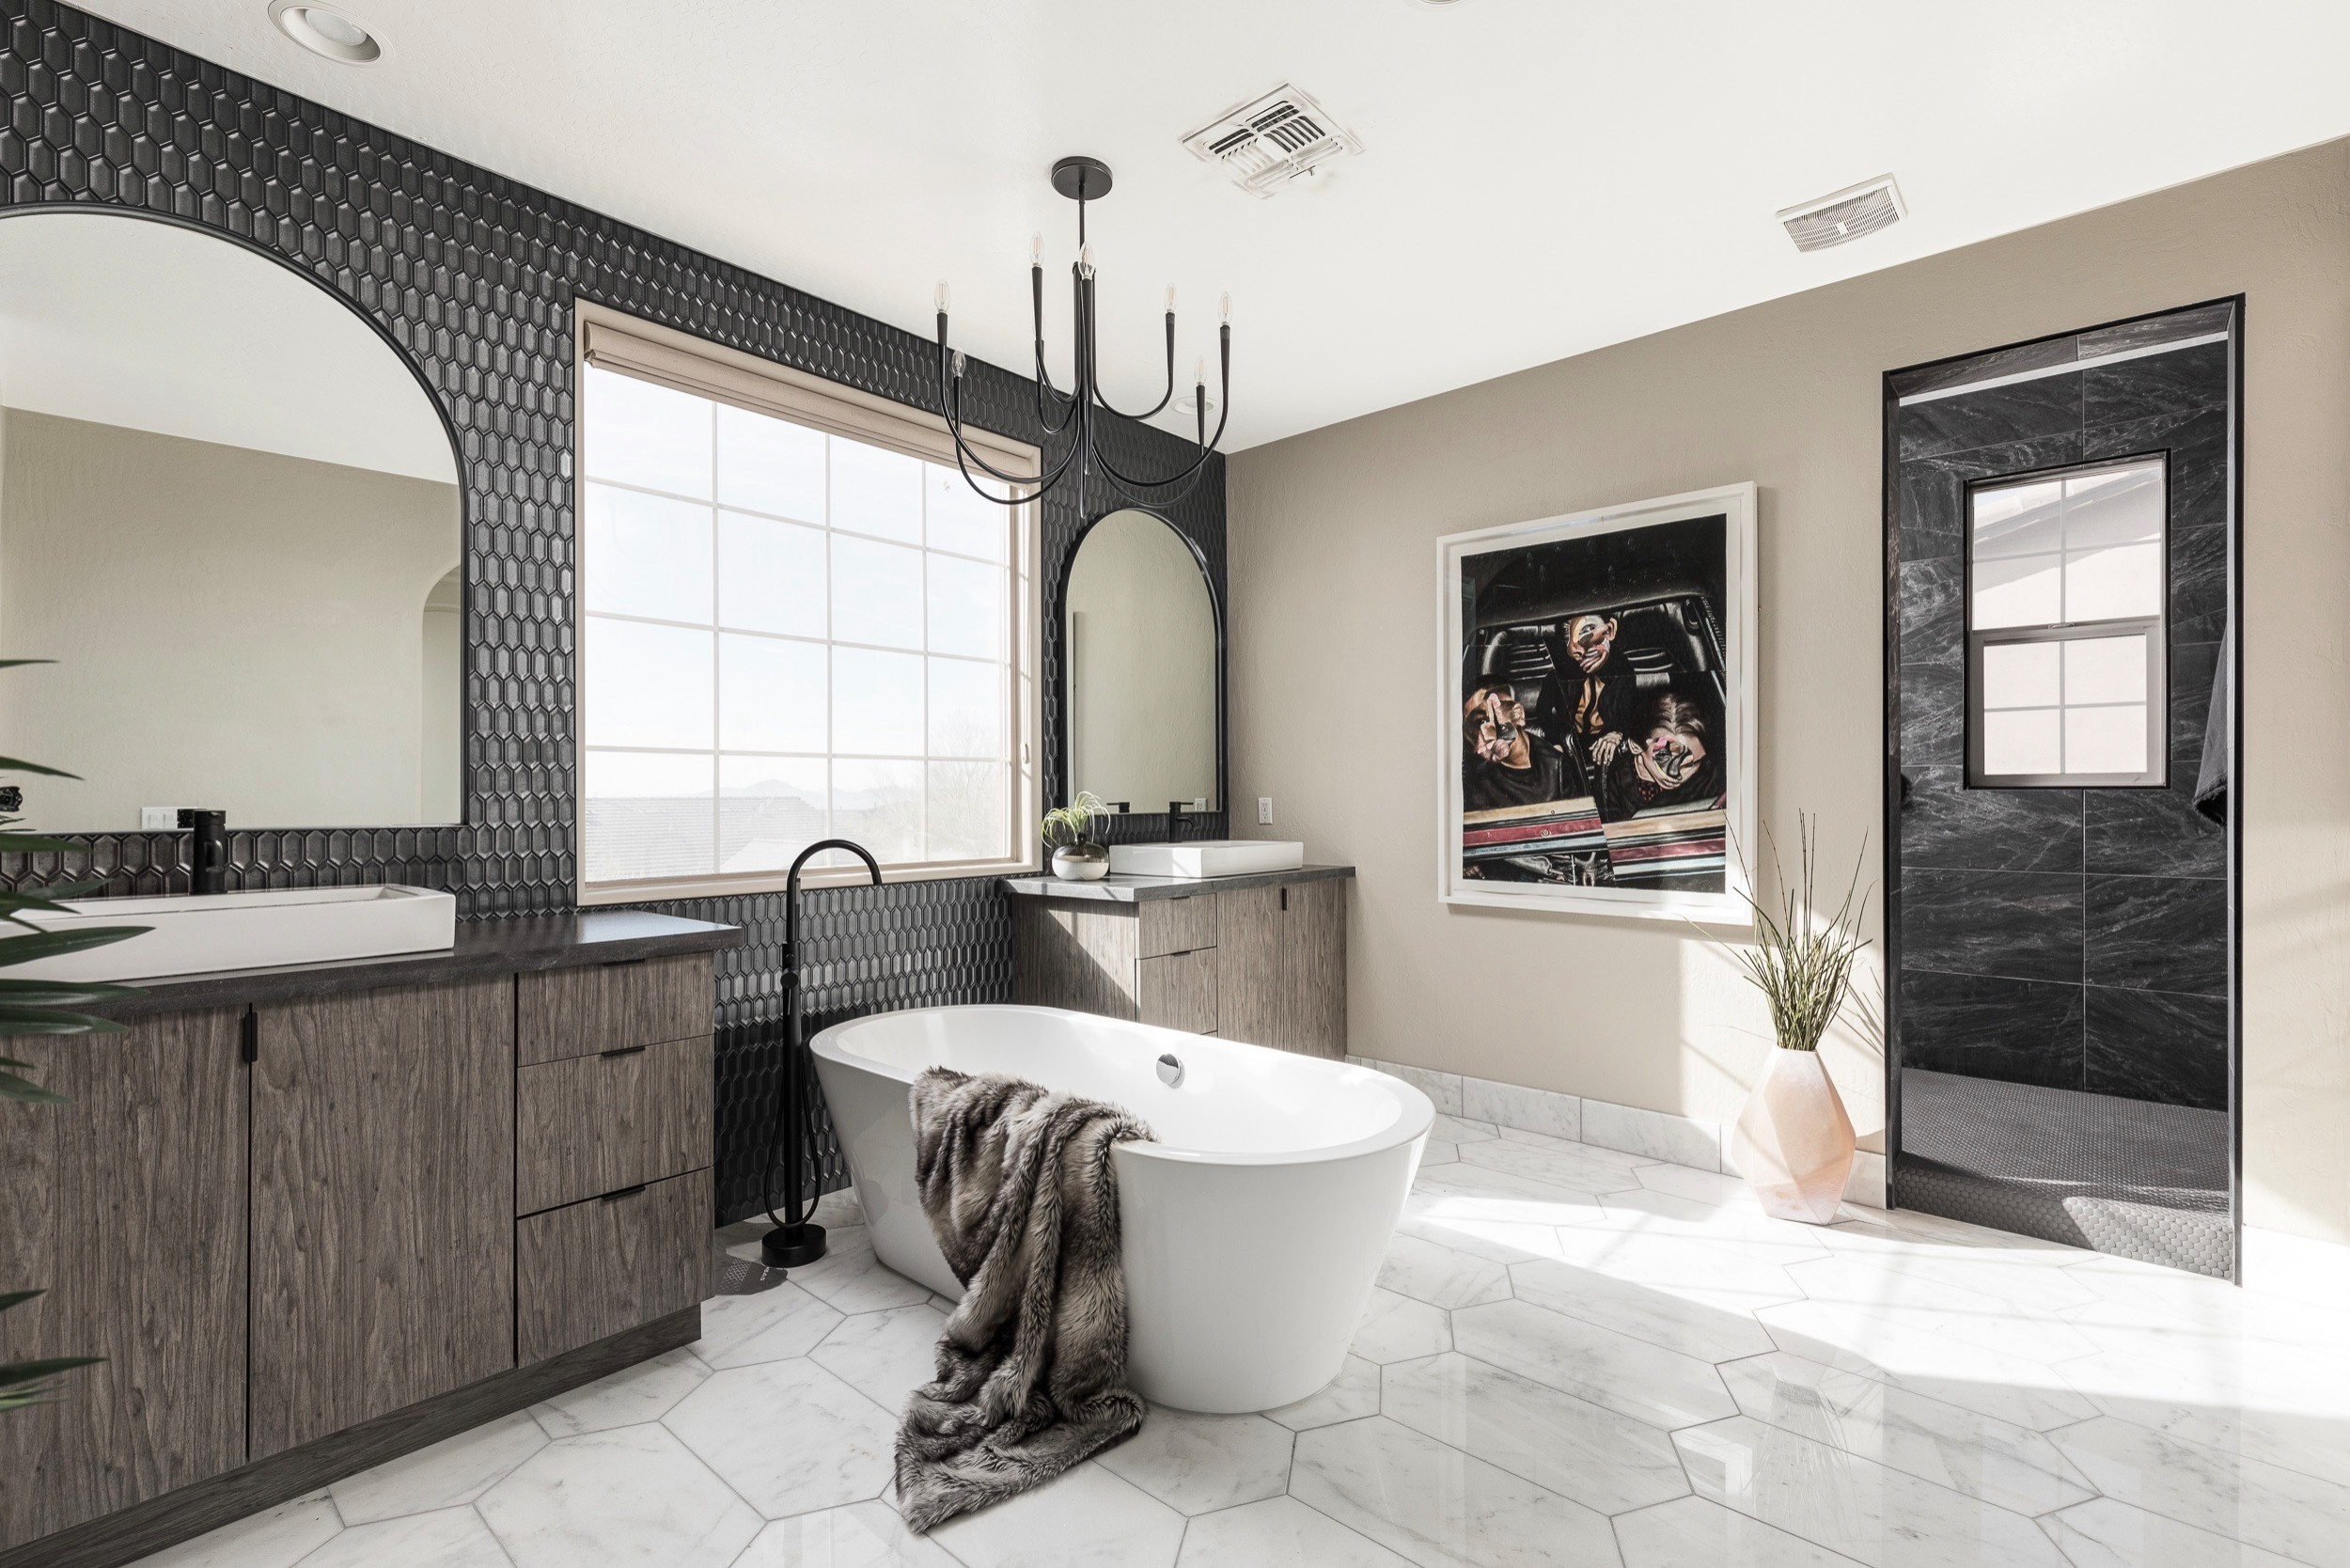 https://st.hzcdn.com/simgs/pictures/bathrooms/trailside-anthony-w-design-and-local-trade-img~475181520e8f276c_14-5968-1-6fbfc10.jpg